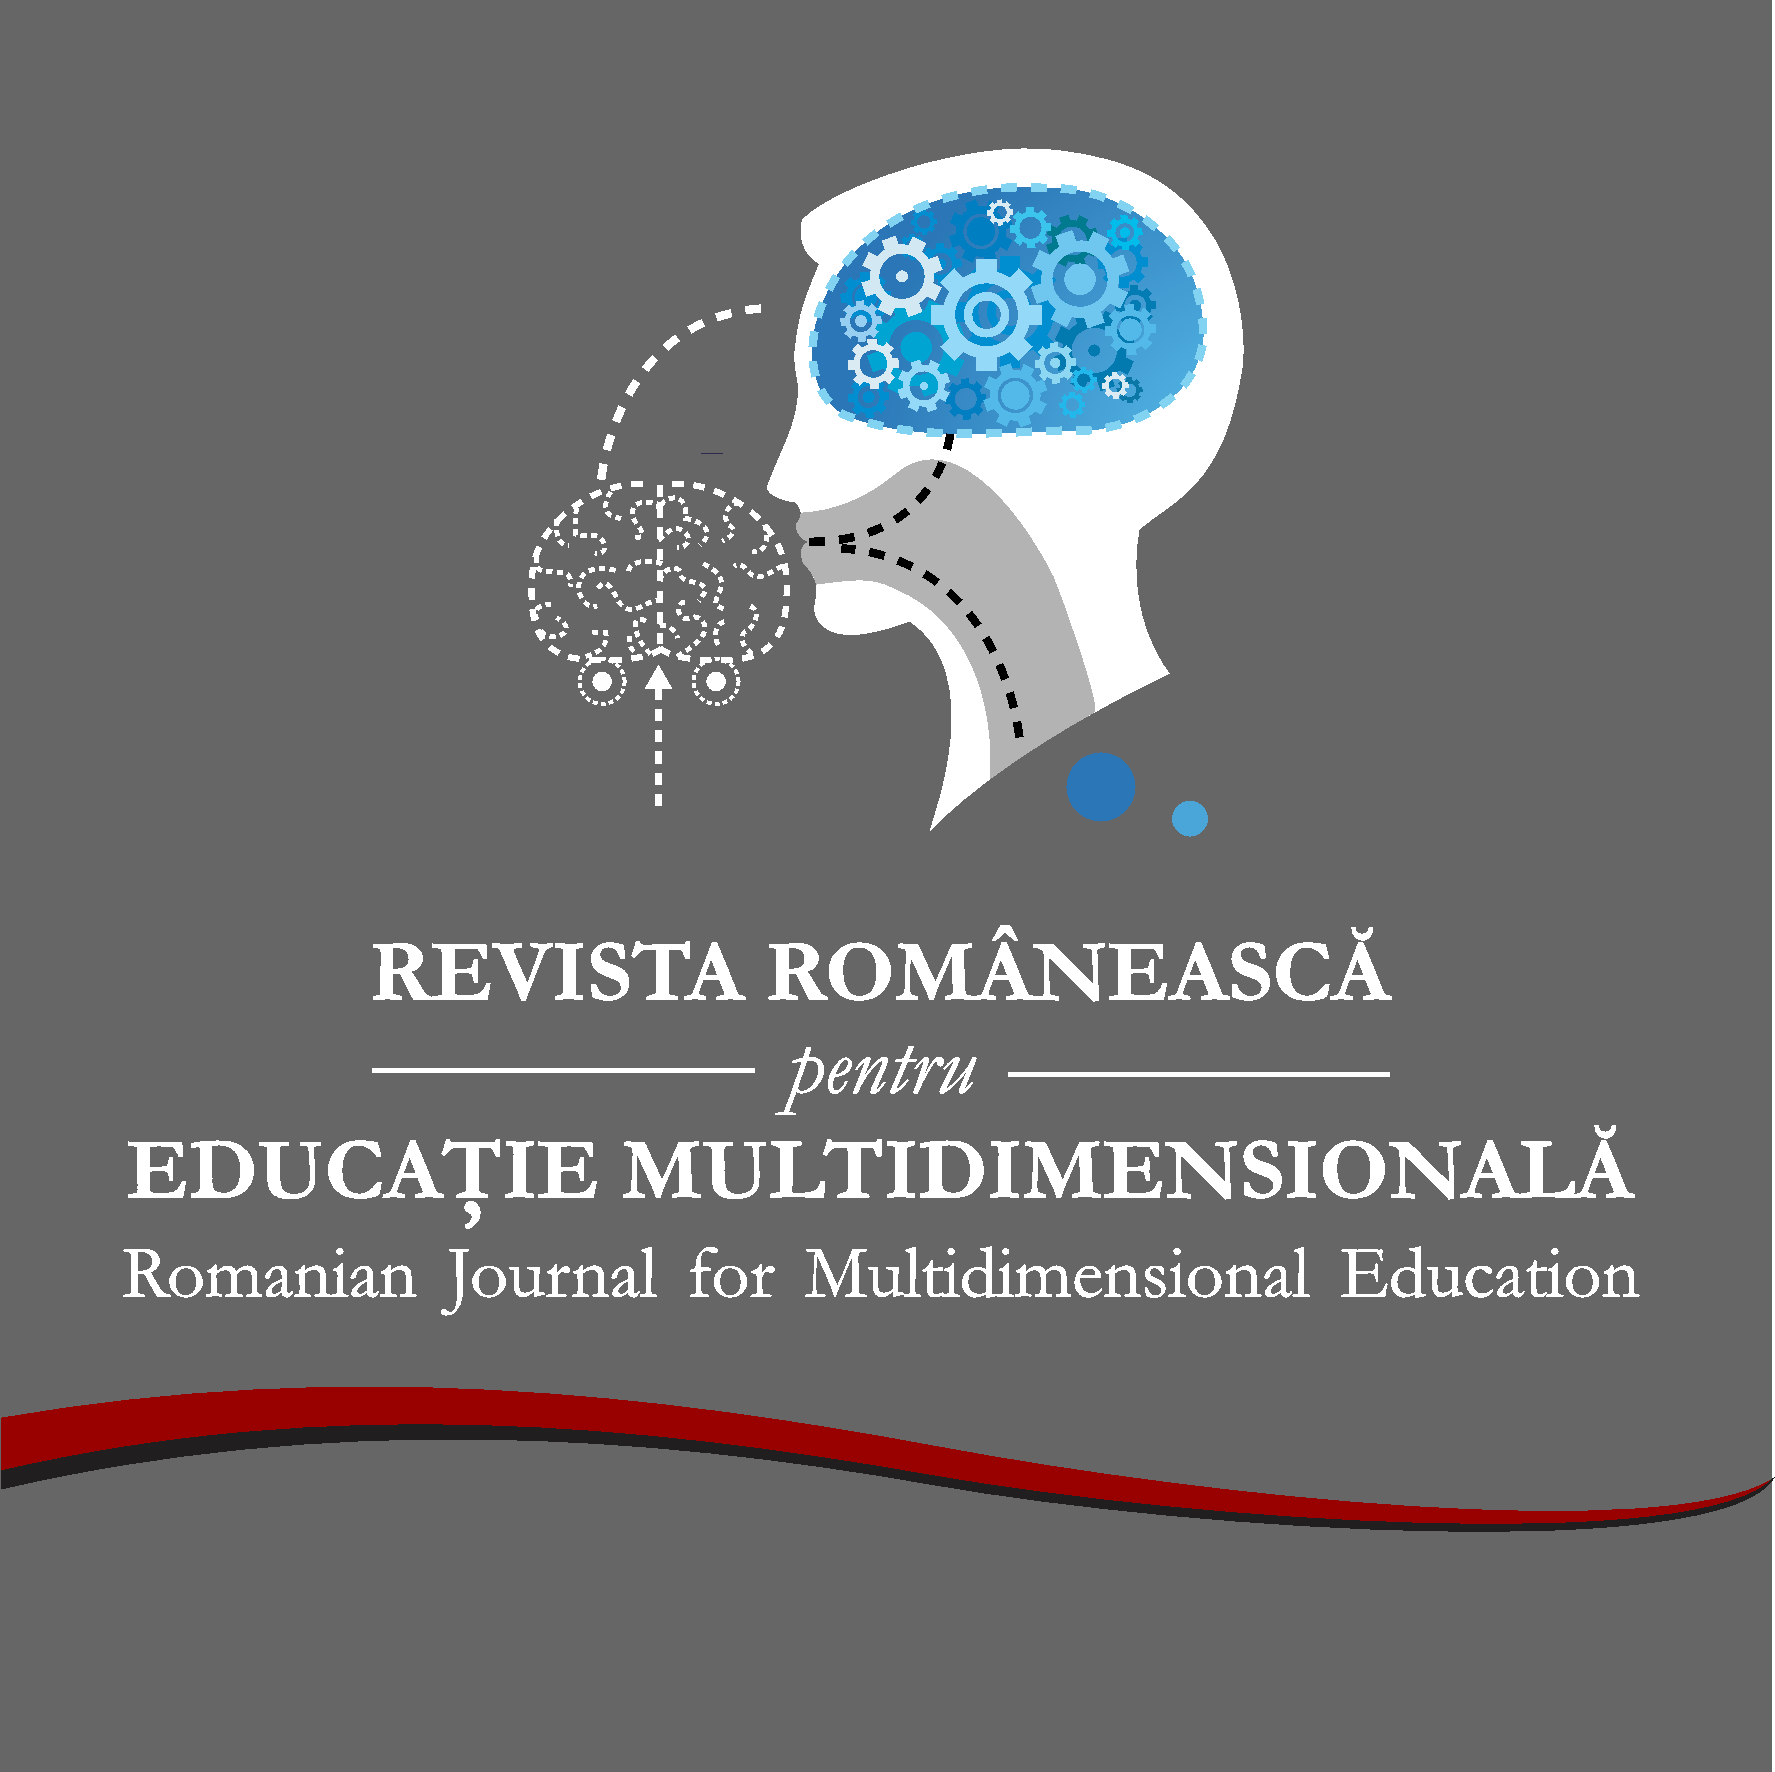 How Do the Romanian Students Consider the Research Competencies Appropriate for Their Future Career?